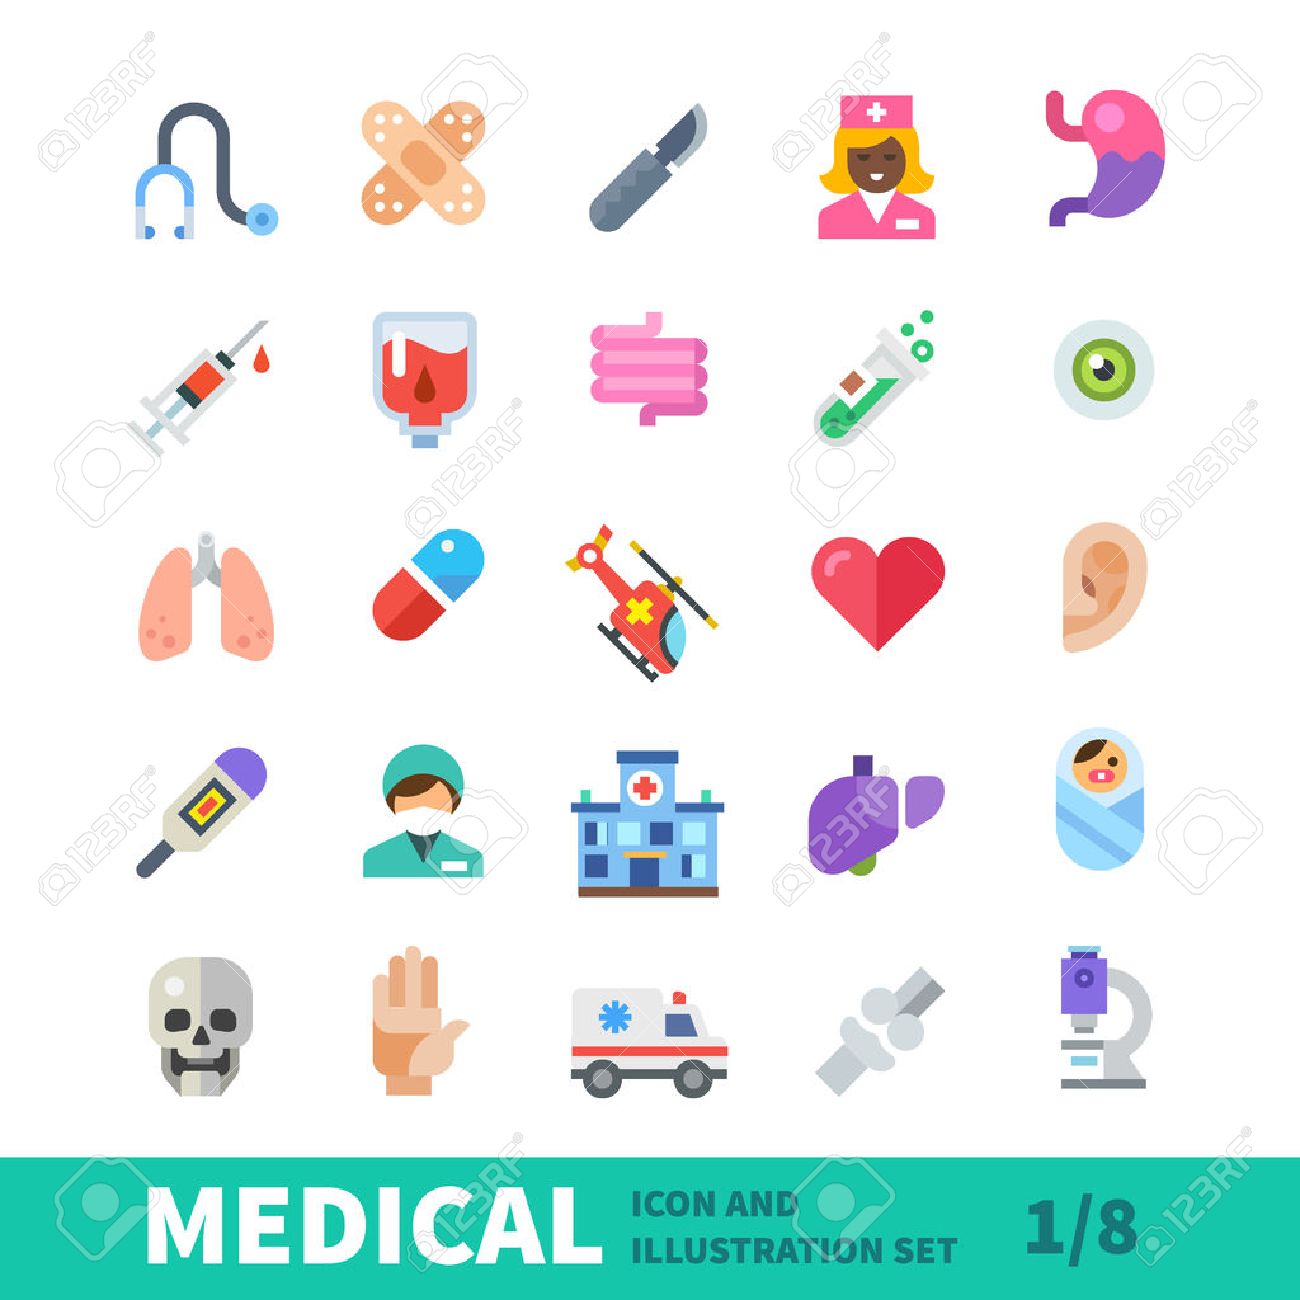 Medical Flat Color Icon Set. Health Research Supplies, Devices 